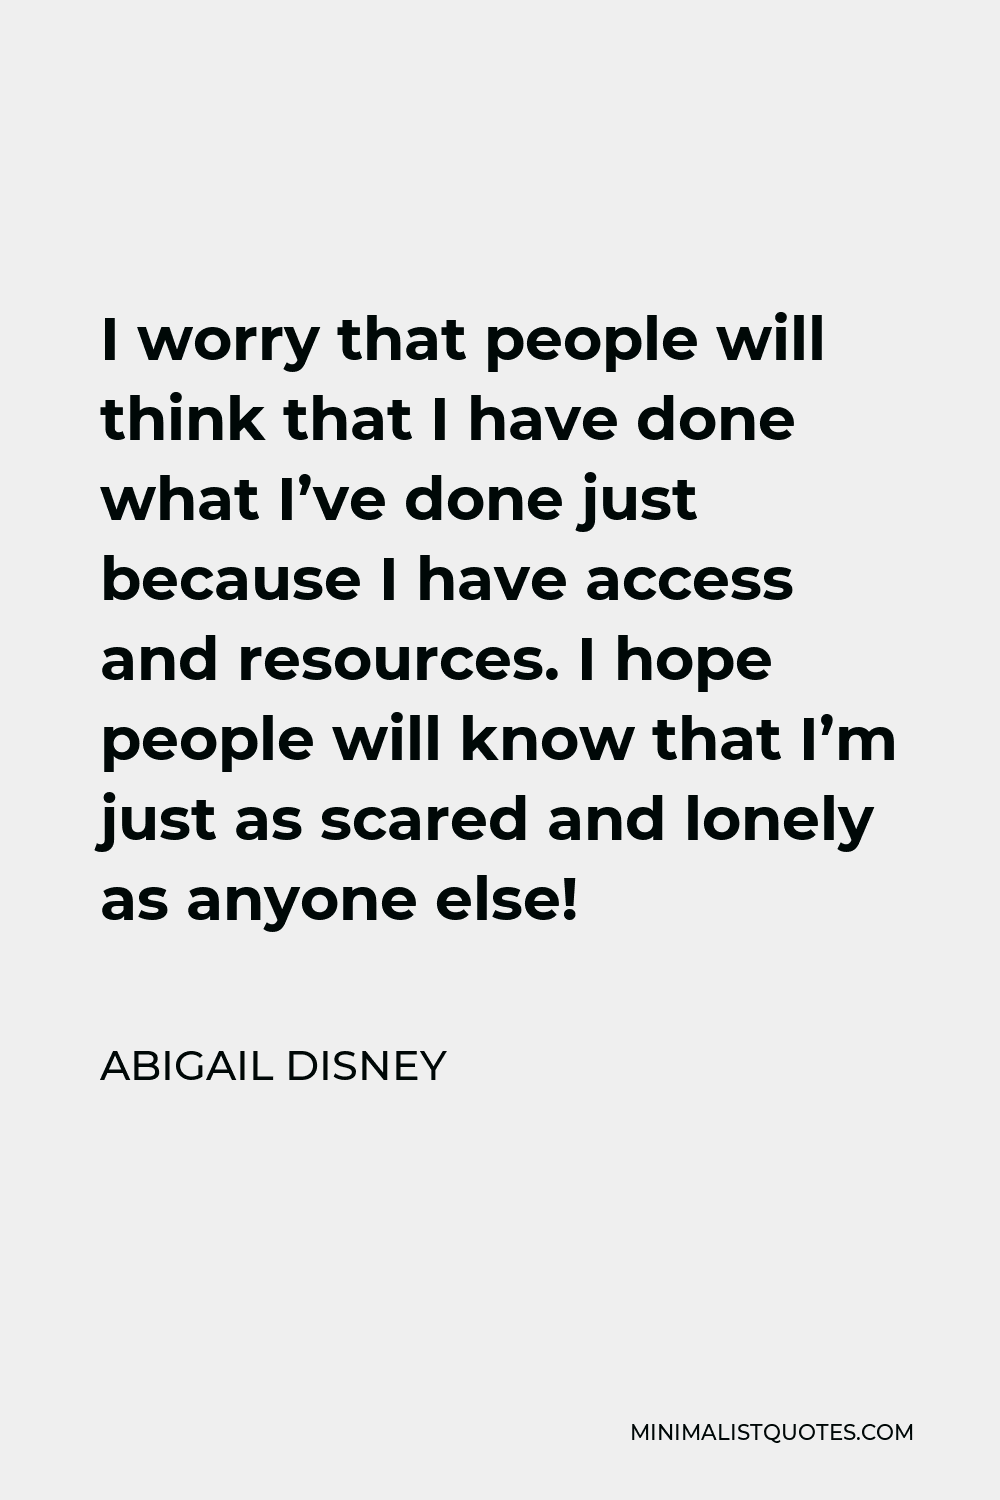 Abigail Disney Quote - I worry that people will think that I have done what I’ve done just because I have access and resources. I hope people will know that I’m just as scared and lonely as anyone else!